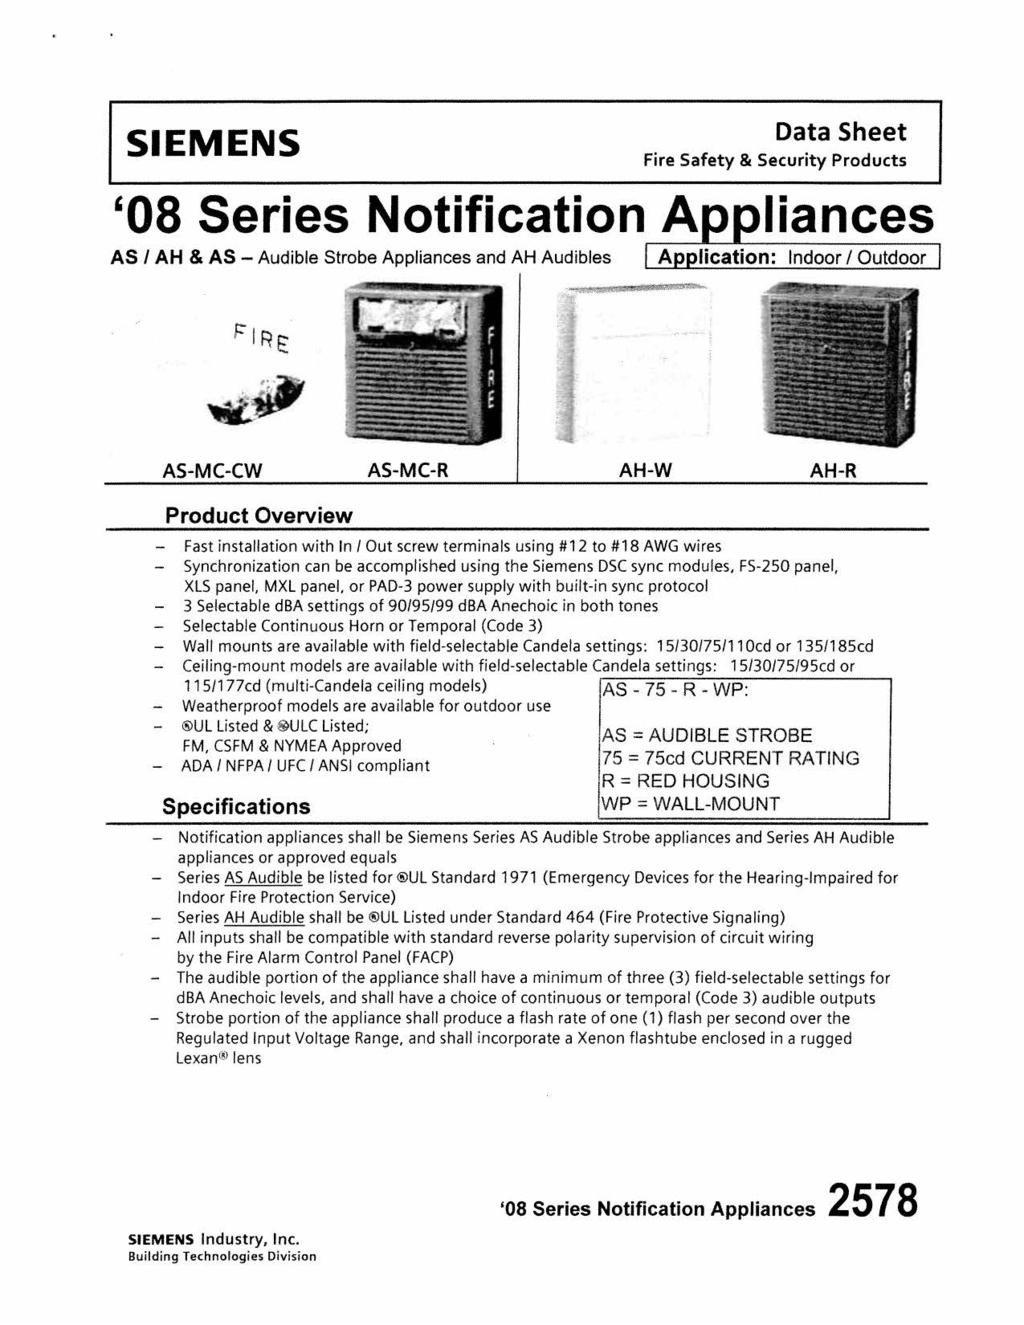 SIEMENS Data Sheet Fire Safety & Security Products '08 Series Notification A liances AS I AH & AS - Audible Strobe Appliances and AH Audibles AS-MC-CW AS-MC-R AH-W AH-R Product Overview - Fast